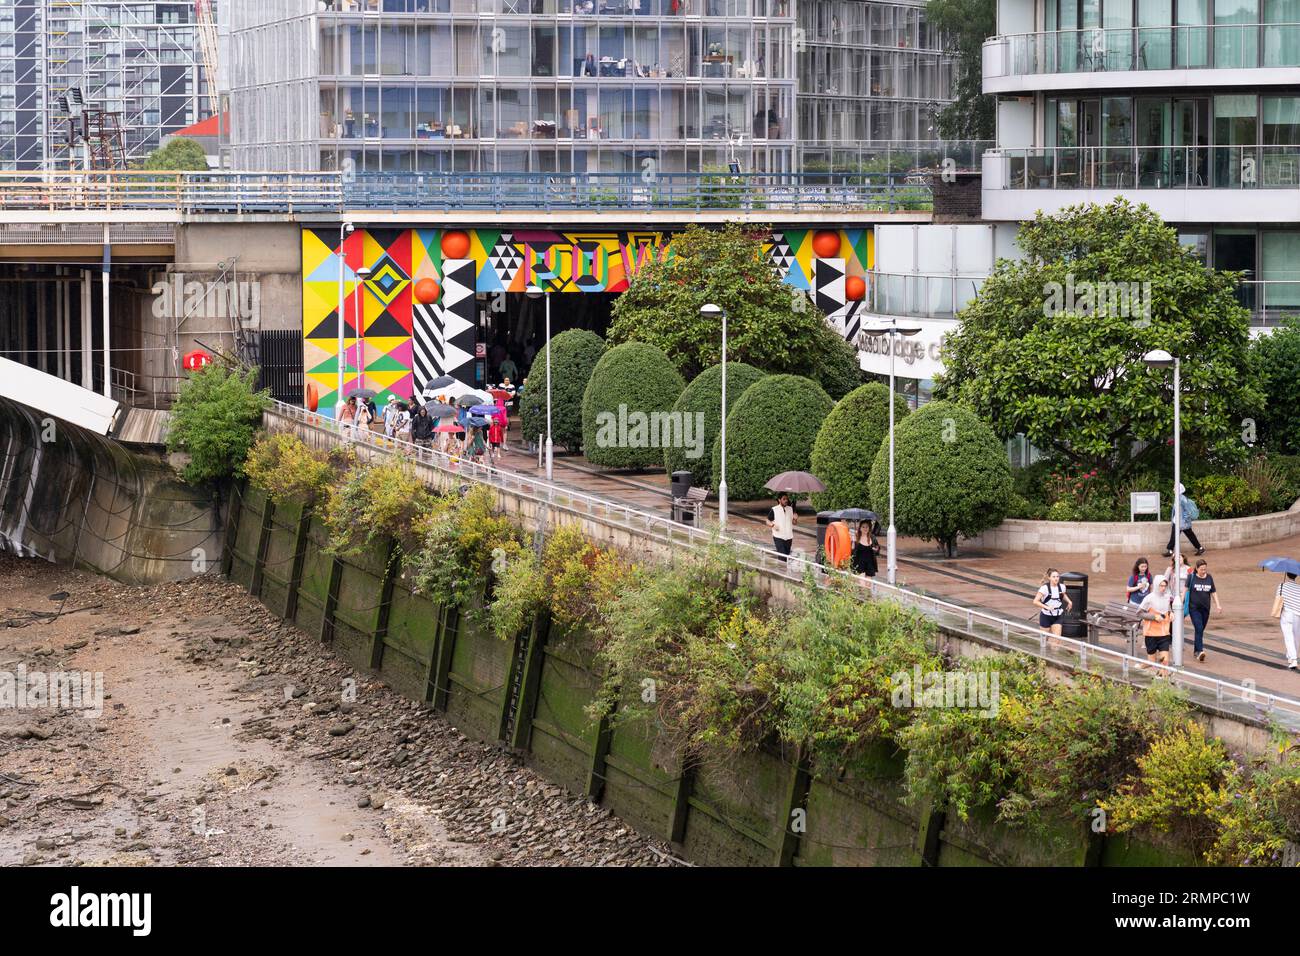 People walking through the Grosvenor Arch Entrance under the Grosvenor Railway Bridge to Battersea Power Station on a rainy day in London. England Stock Photo